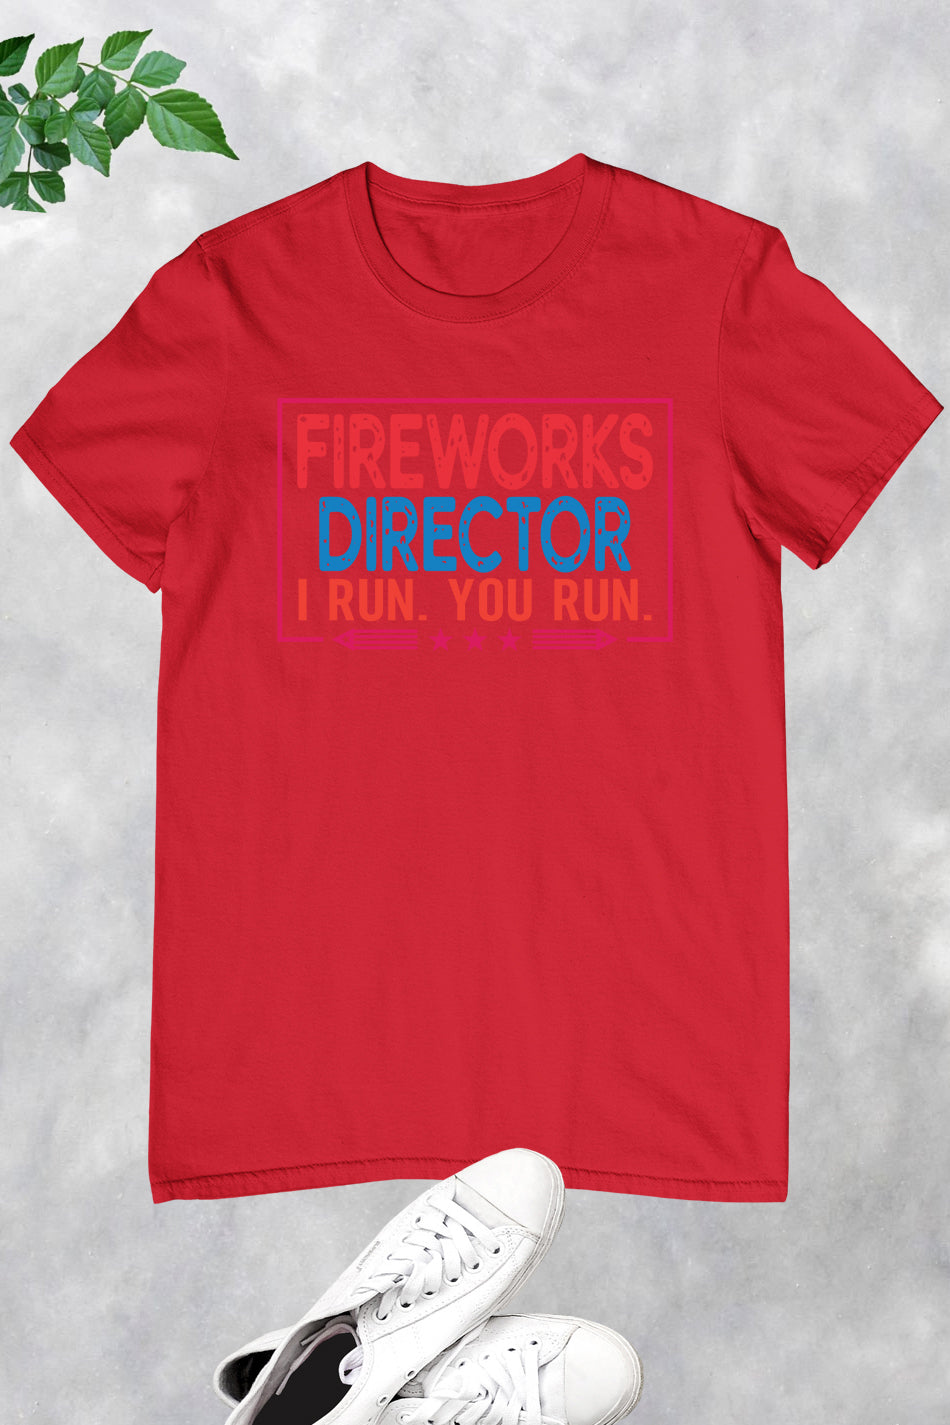 Fireworks Director Funny 4th Of July Shirt